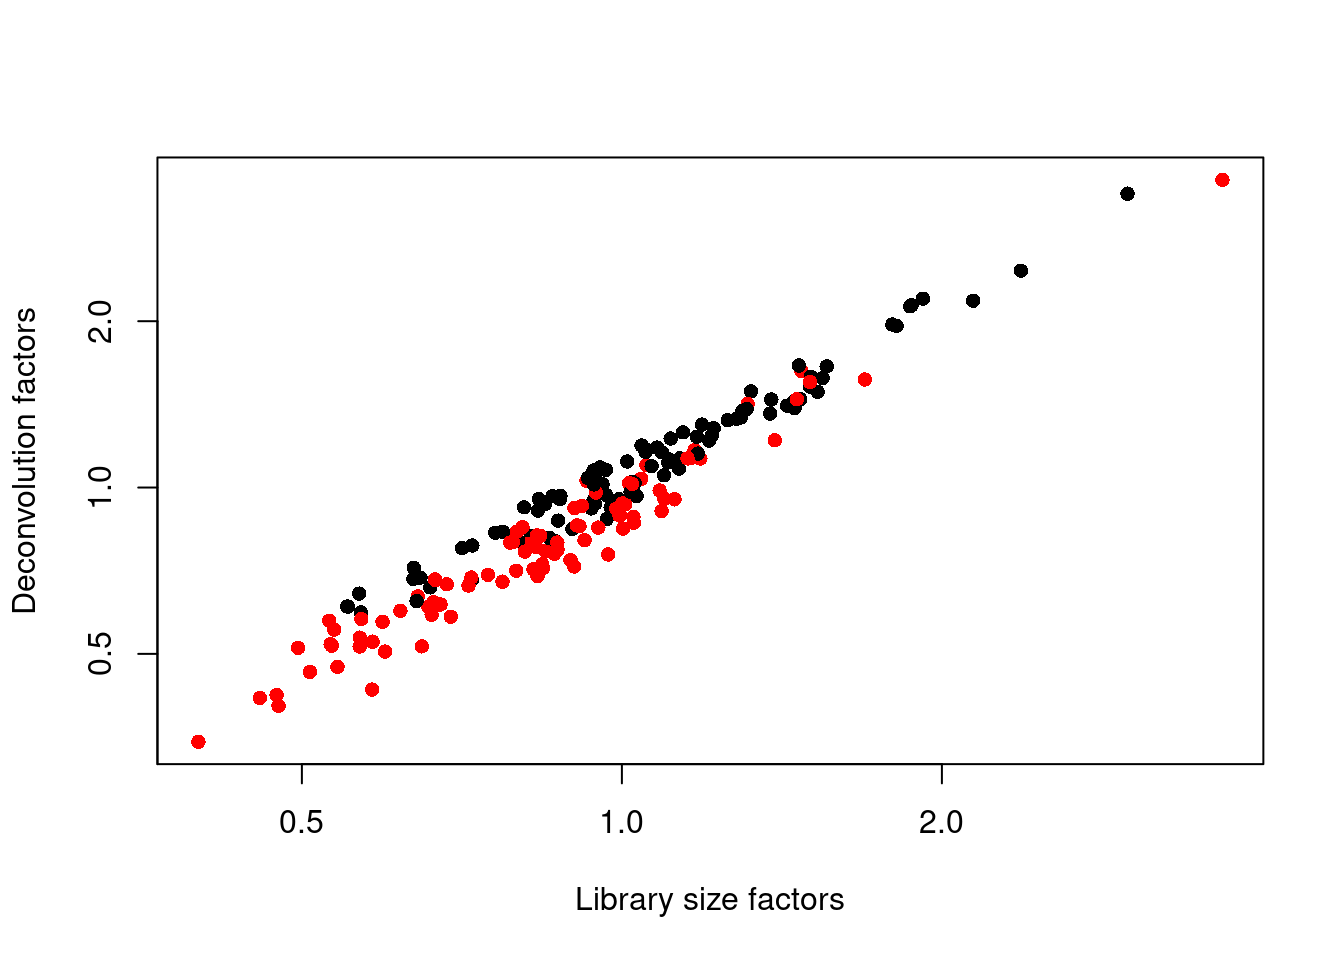 Relationship between the library size factors and the deconvolution size factors in the 416B dataset. Each cell is colored according to its oncogene induction status.